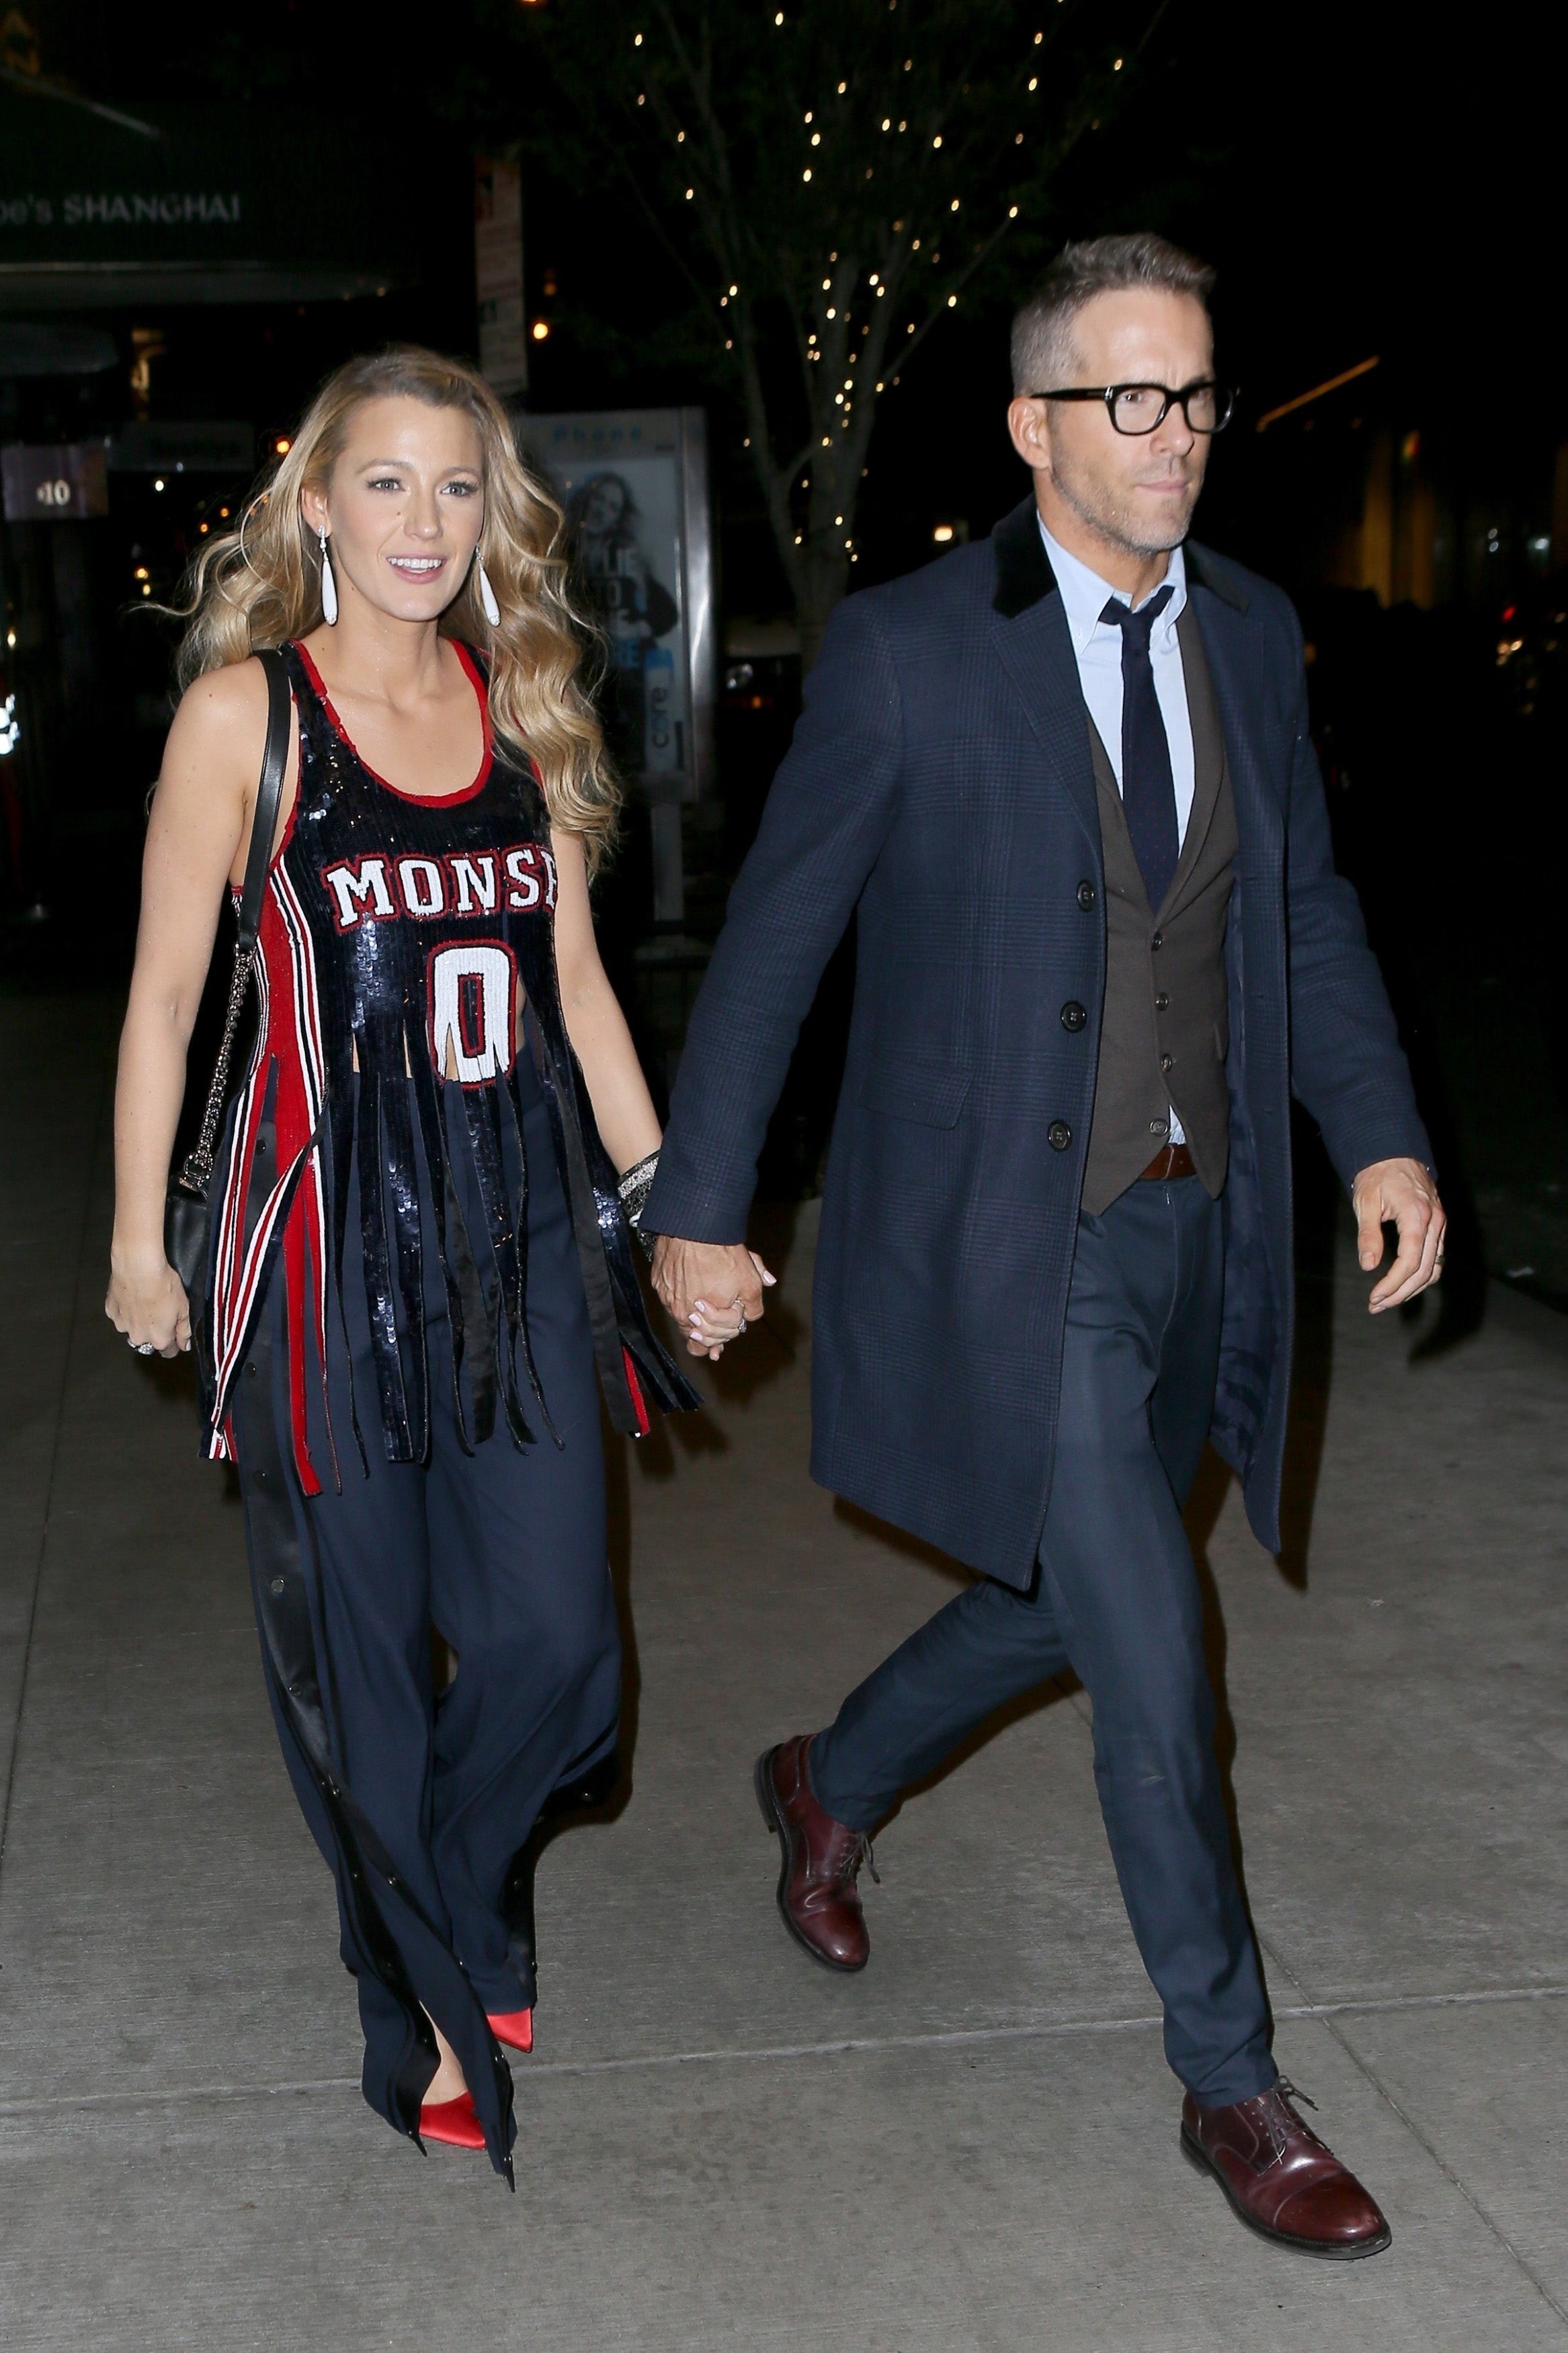 Blake Lively Stuns in Bedazzled Jersey, Holds Hands With Ryan Reynolds:  Pic!